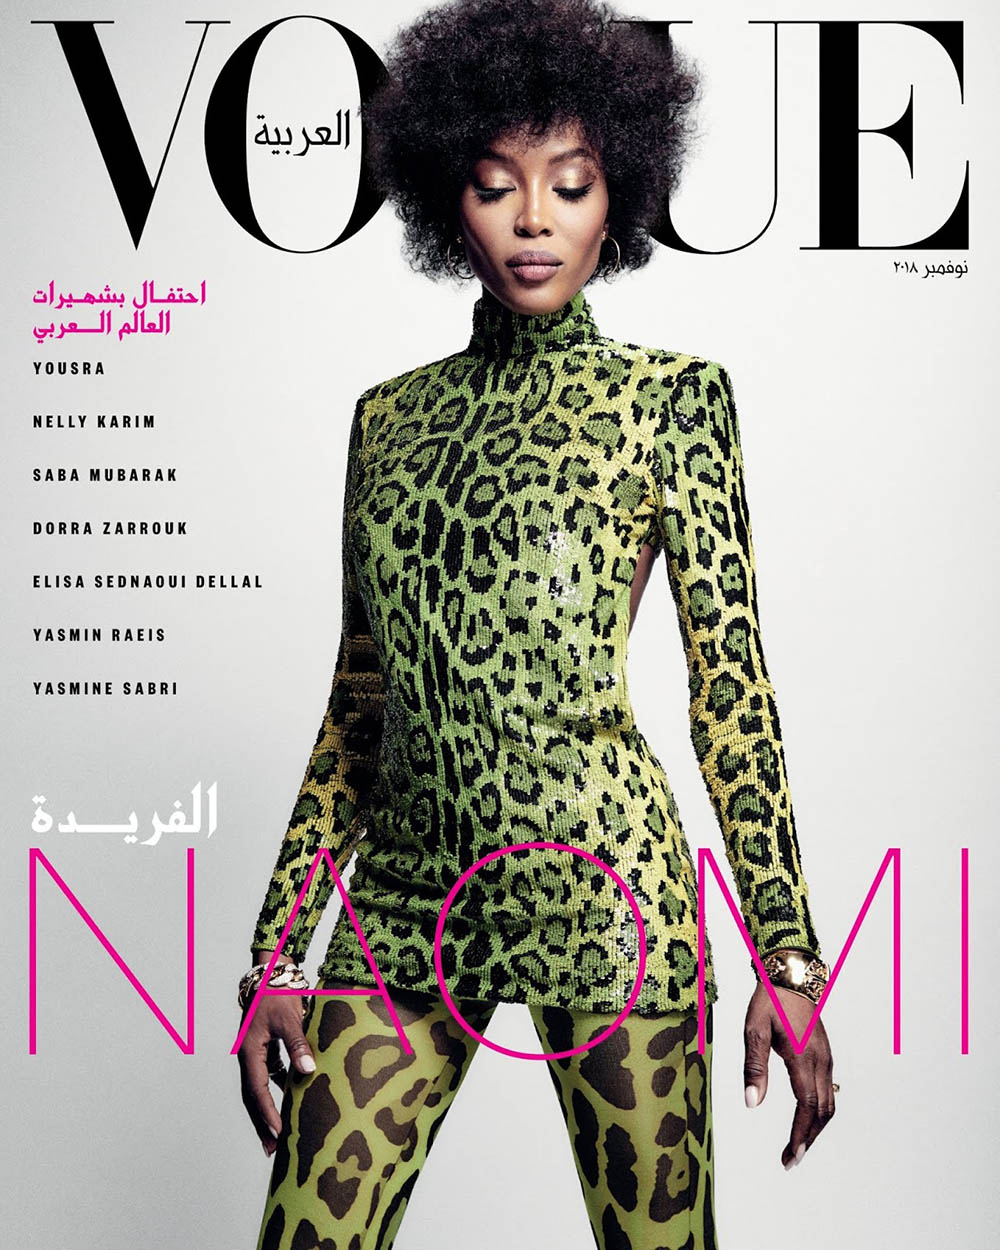 Naomi Campbell covers Vogue Arabia November 2018 by Chris Colls